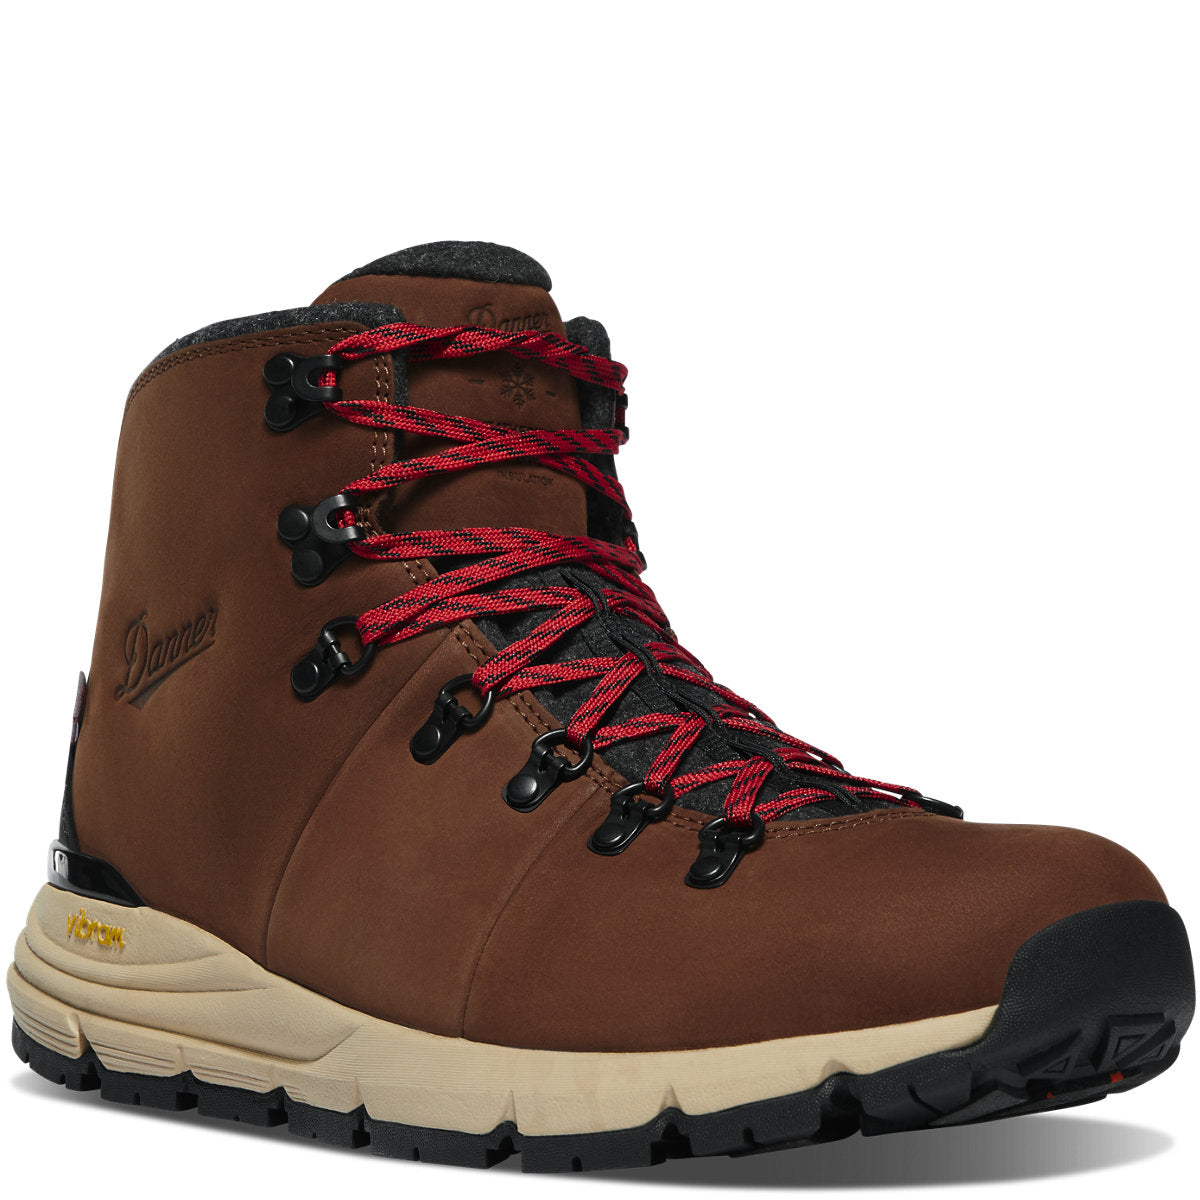 Men's Mountain 600 Insulated Winter Boots